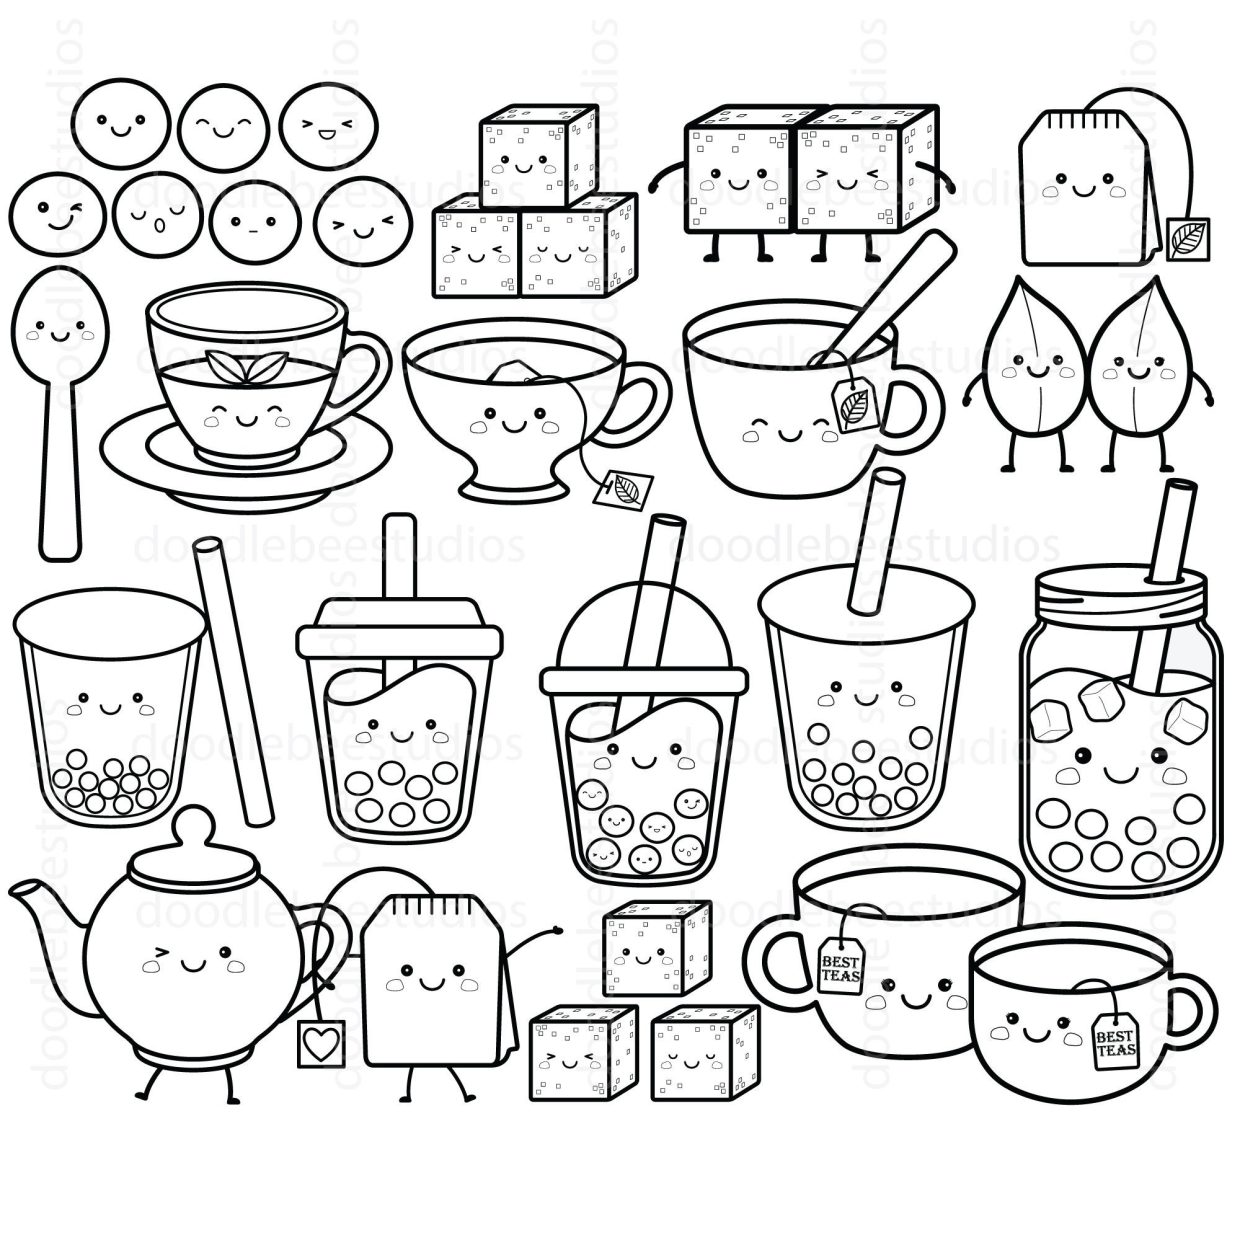 Discover adorable and free cute boba tea coloring pages